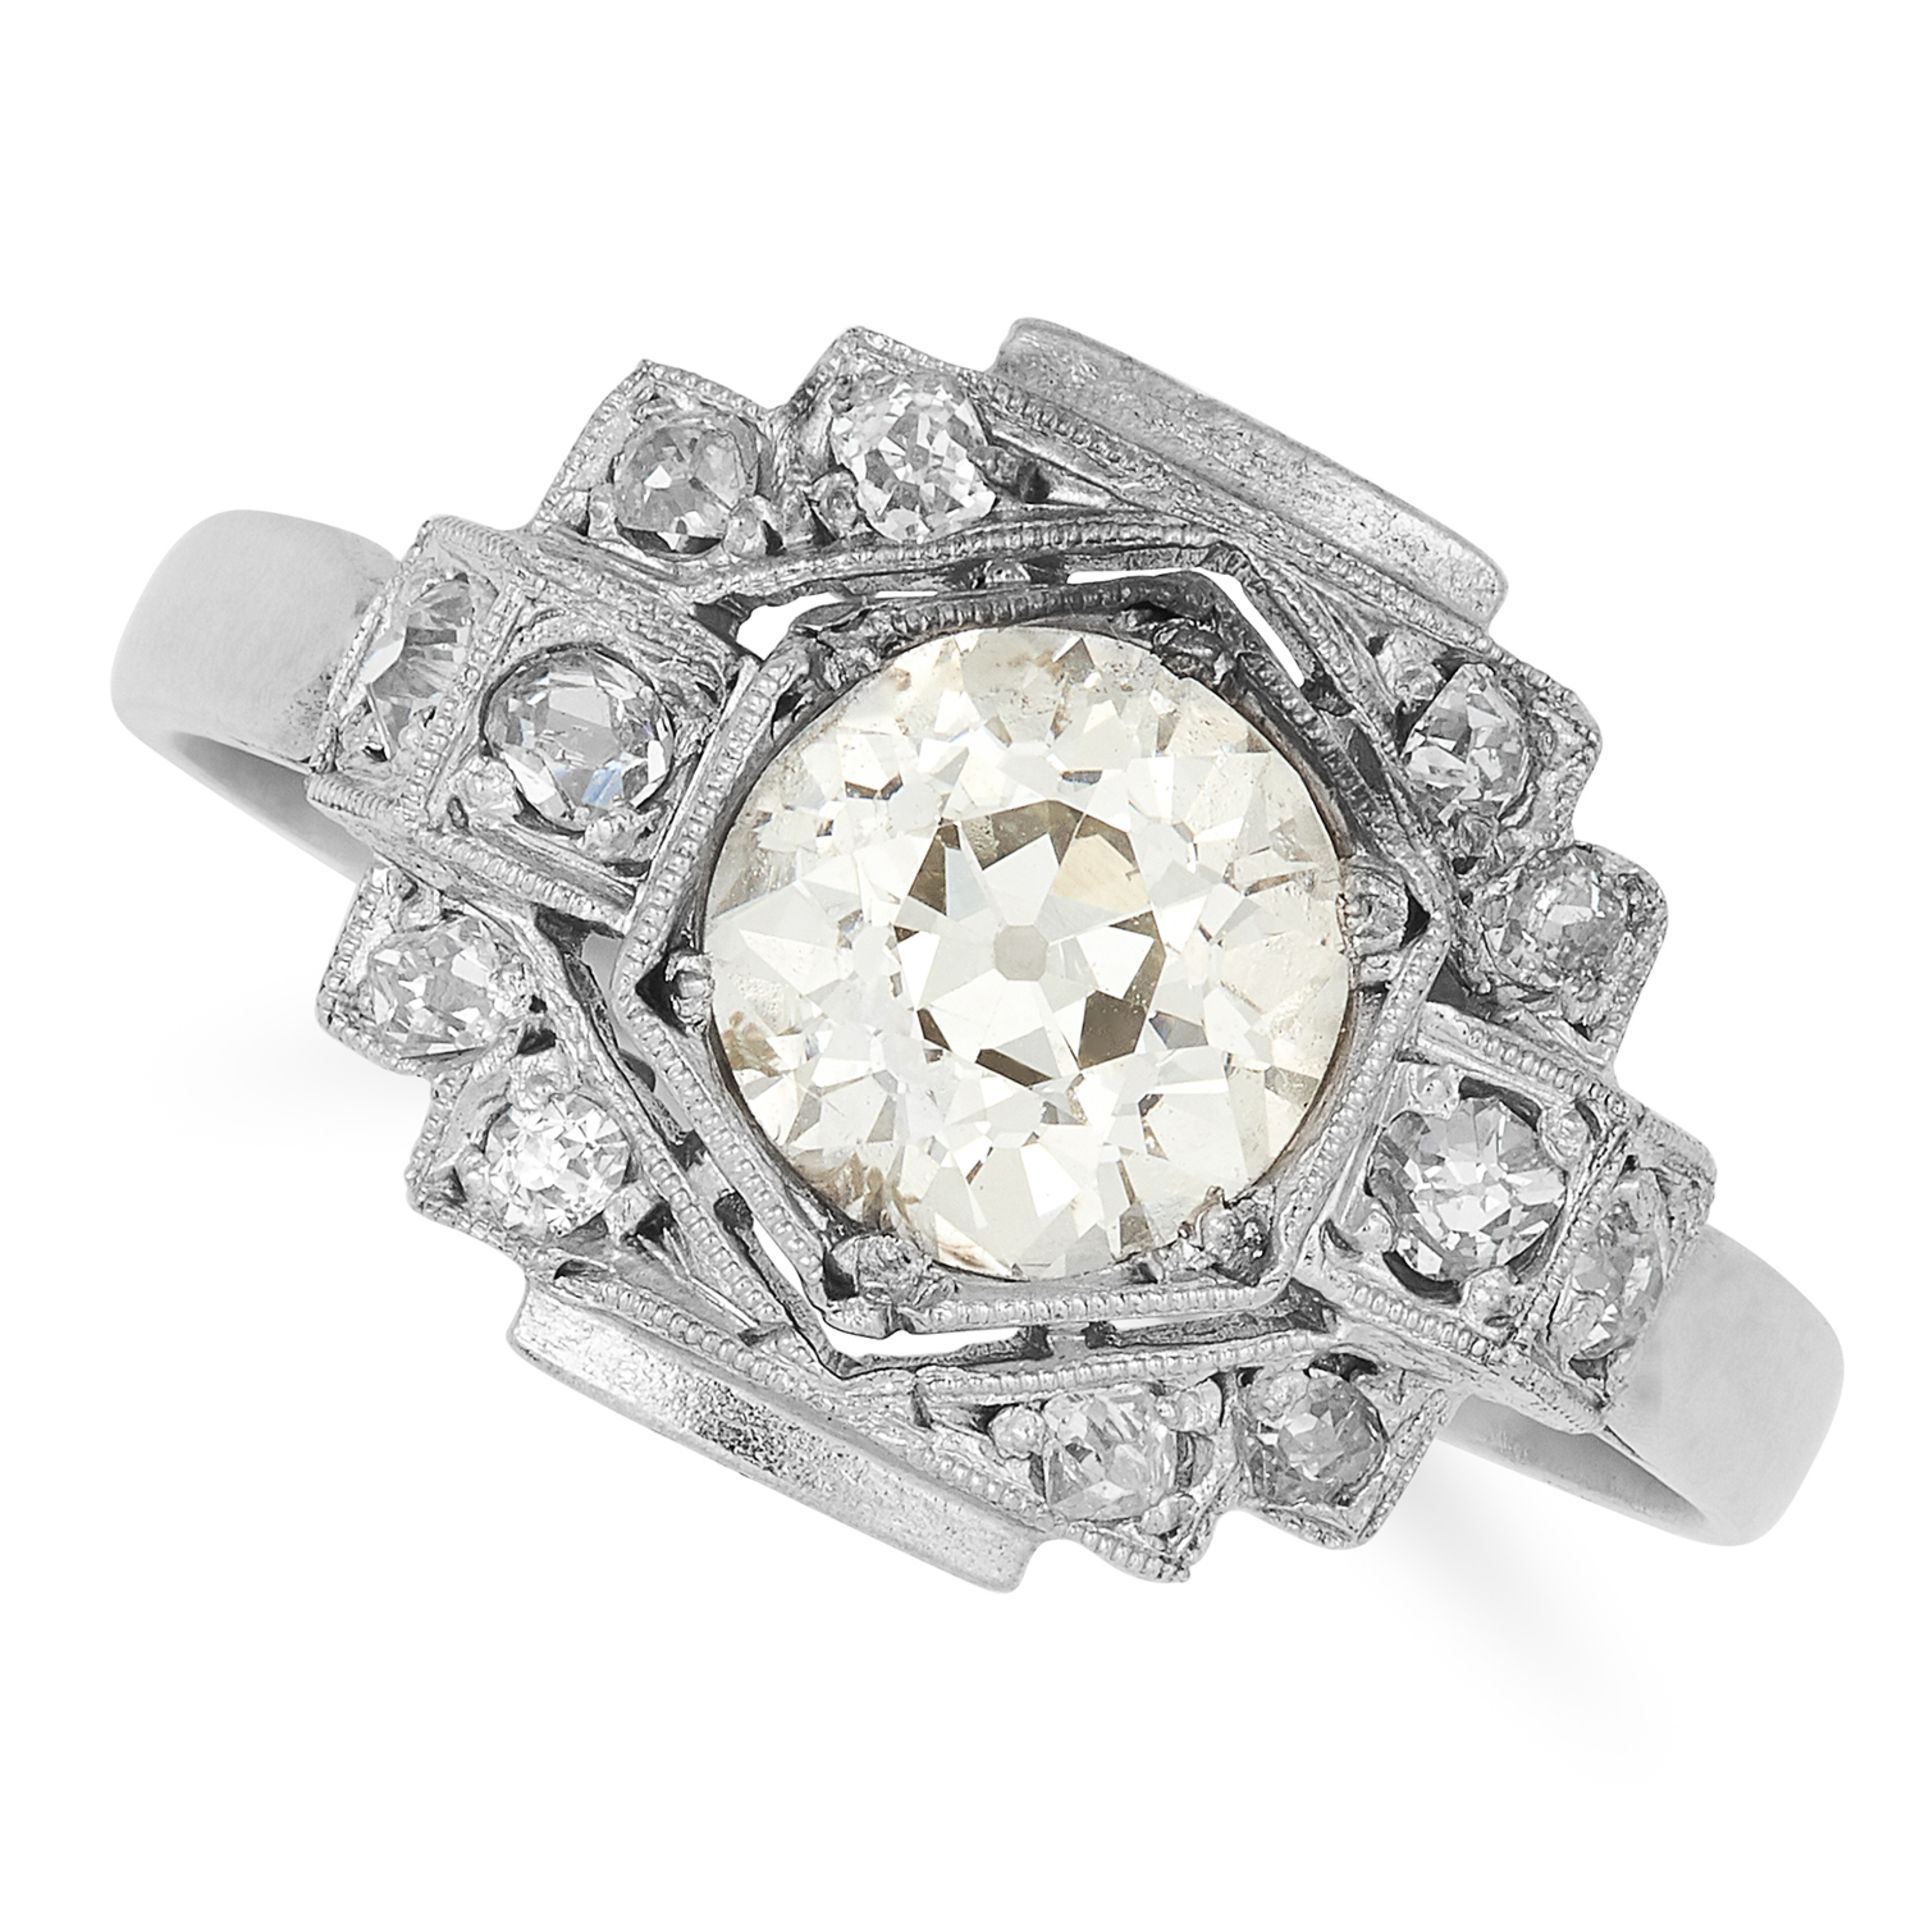 ANTIQUE ART DECO DIAMOND DRESS RING set with a central old cut diamond of approximately 1.18